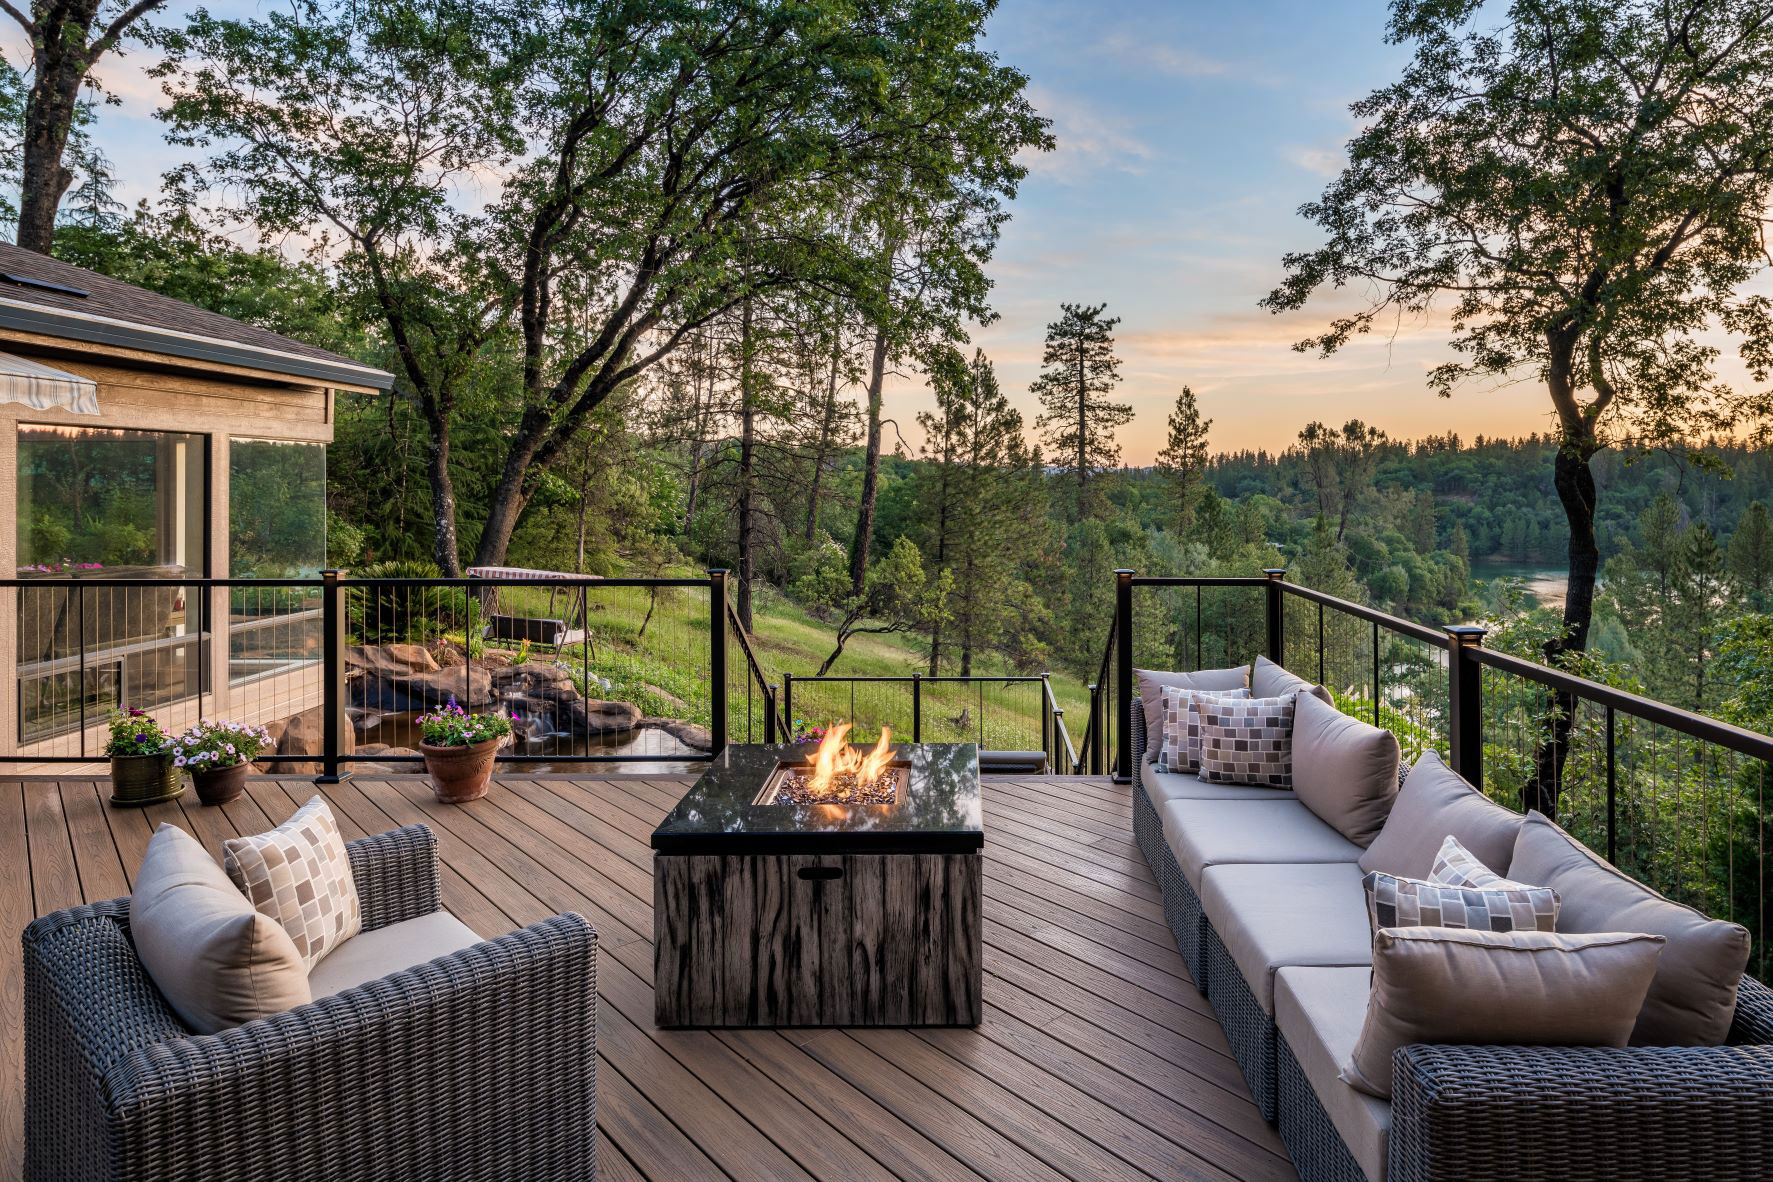 Outdoor living area with couches around a fireplace and the sun setting over the trees in the background.